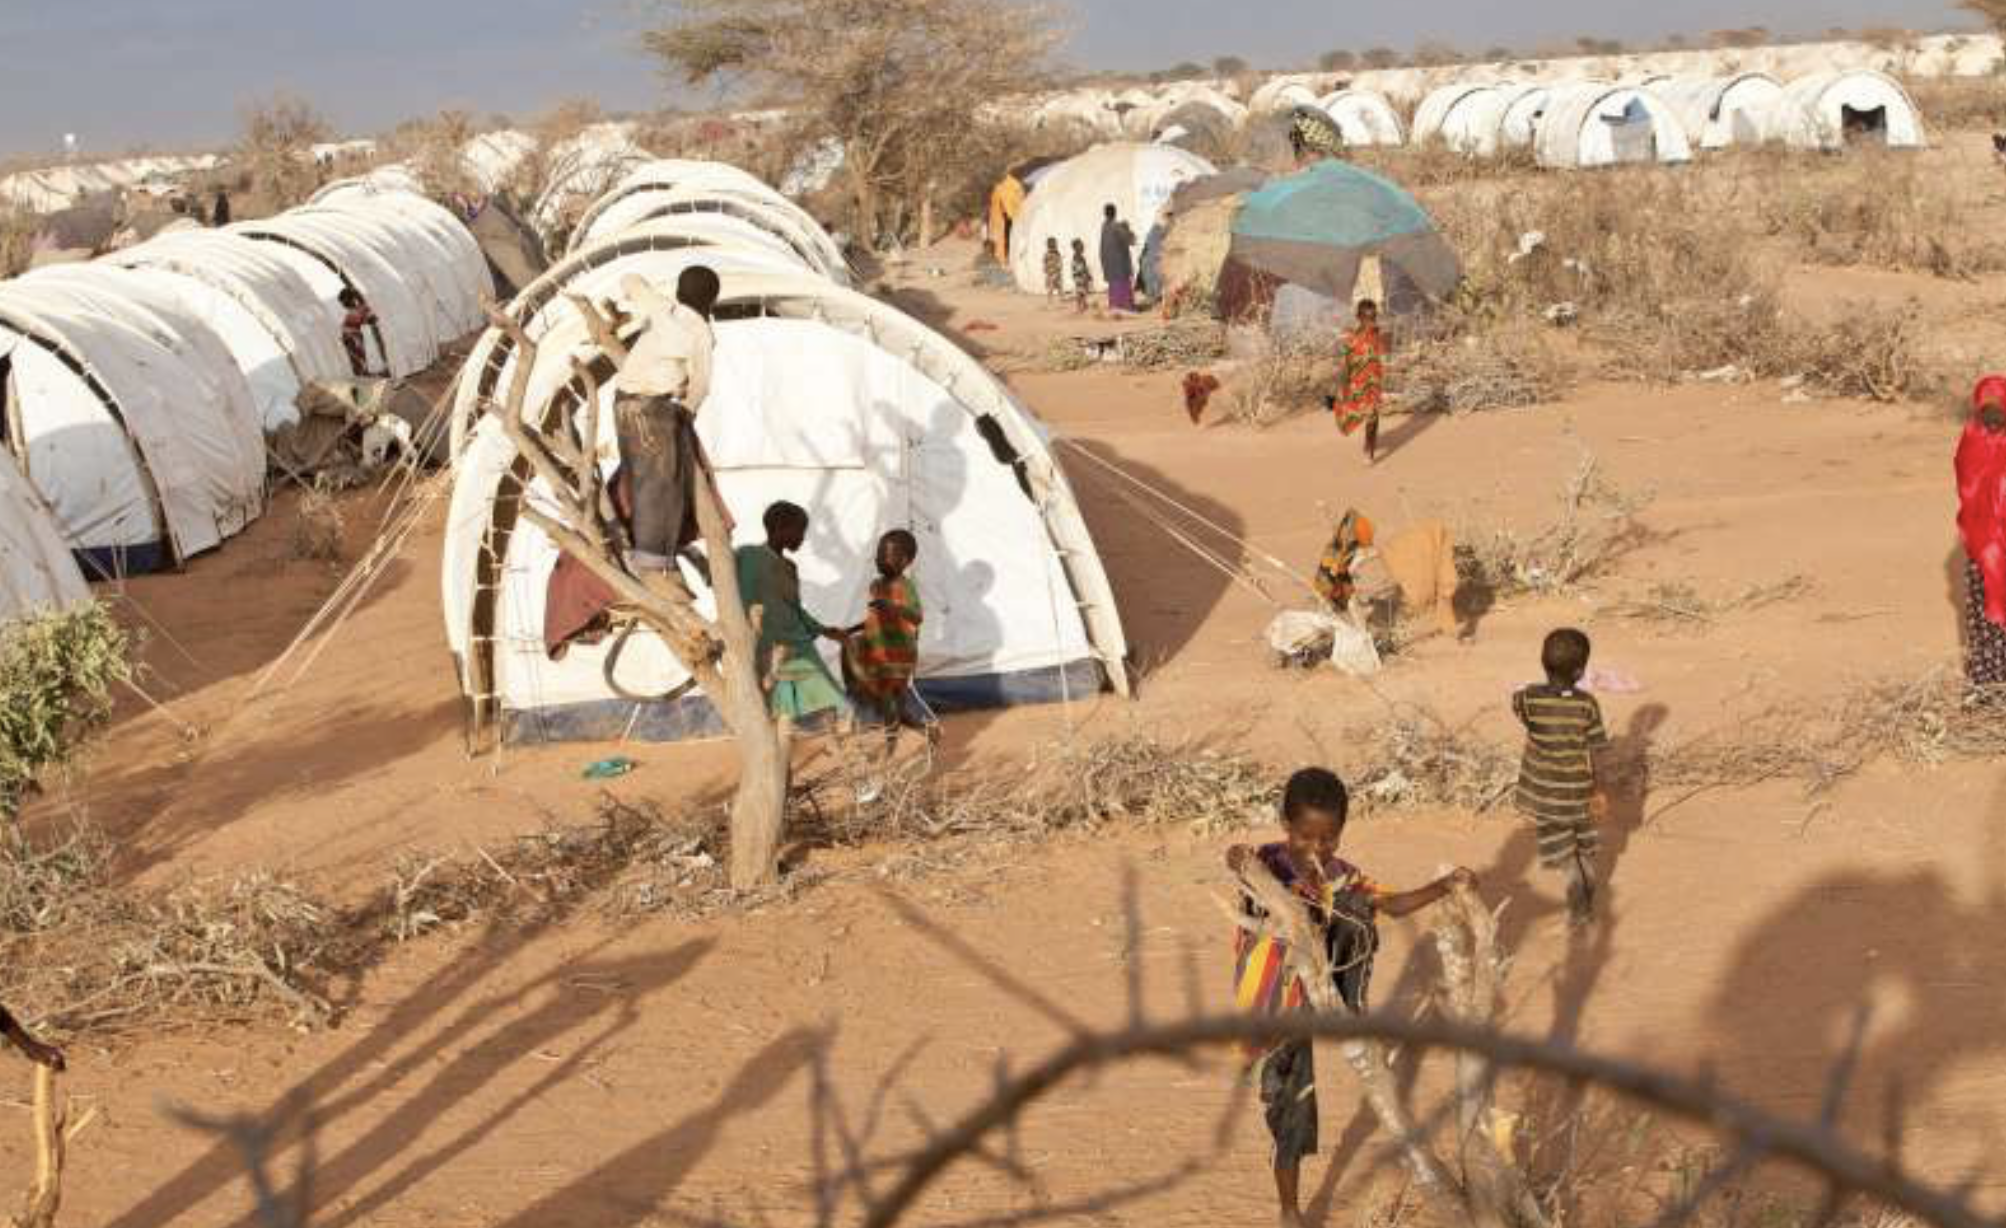 Somali refugee children play around their shelters in Kenya's Dadaab refugee camp, third largest in the world. 2015 (Photo by B. Bannon courtesy UNHCR)